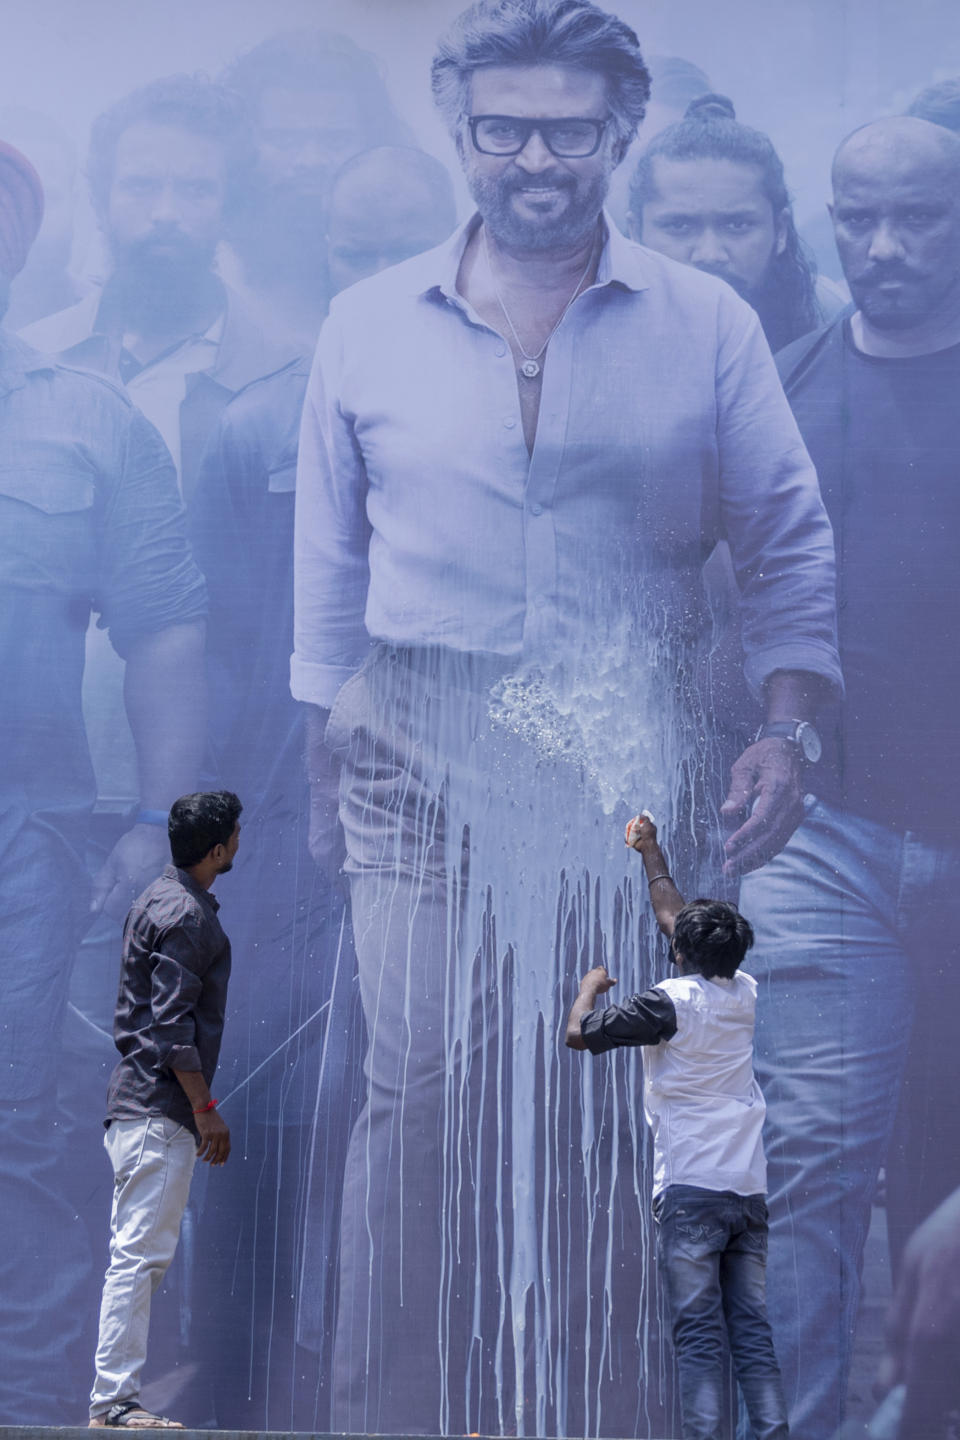 Indian fans pour milk on a huge poster of their superstar Rajinikanth, outside a cinema hall as they celebrate the screening of his latest film "Jailer" in Chennai, India, Thursday, Aug. 10, 2023. (AP Photo/ R. Parthibhan)